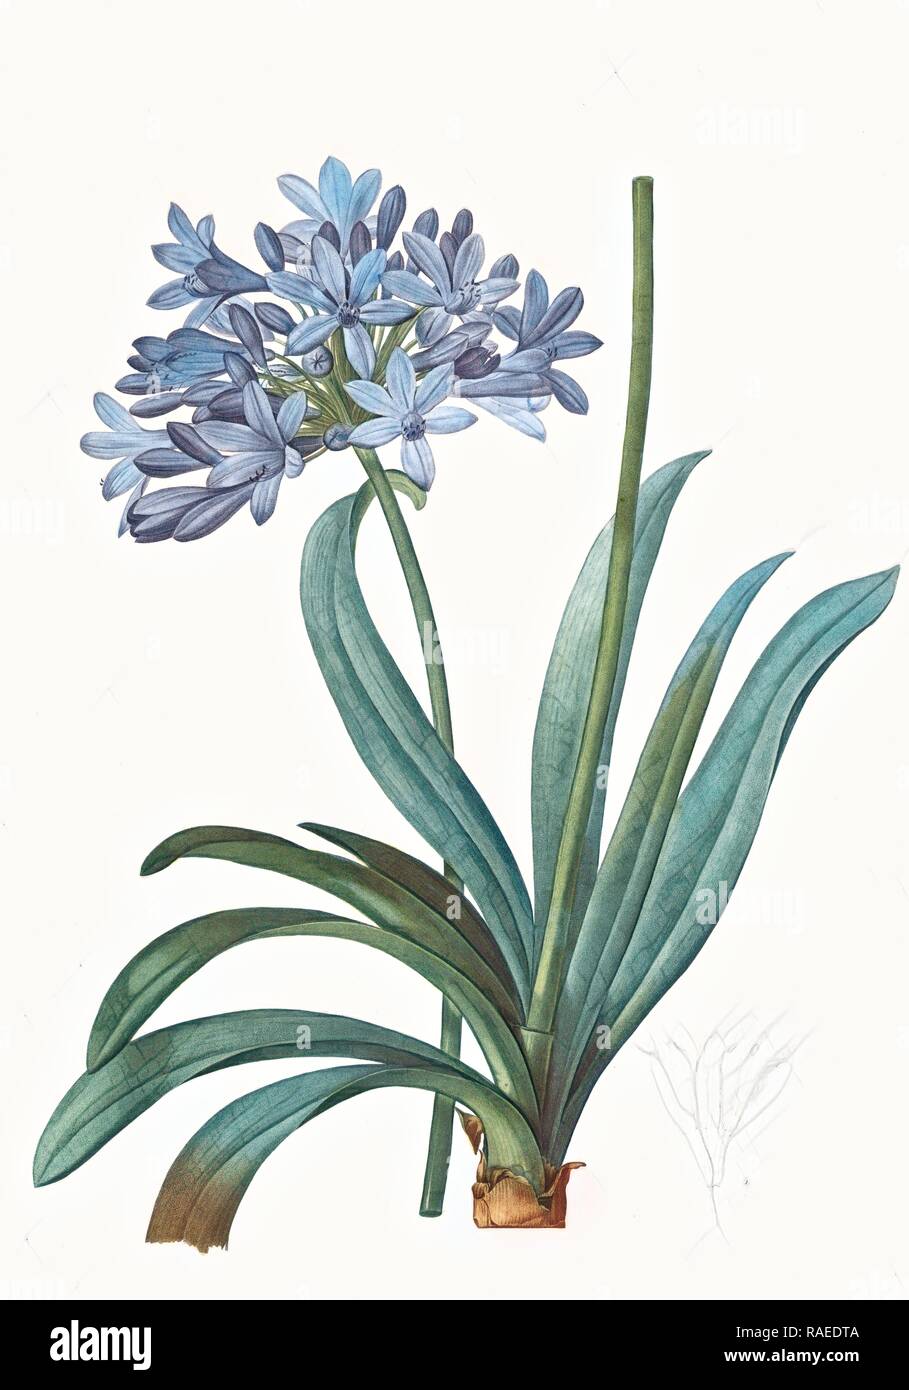 Agapanthus umbellatus, Agapanthus africanus, Lily-of-the Nile, Agapanthe en ombelle, Redouté, Pierre Joseph, 1759- reimagined Stock Photo